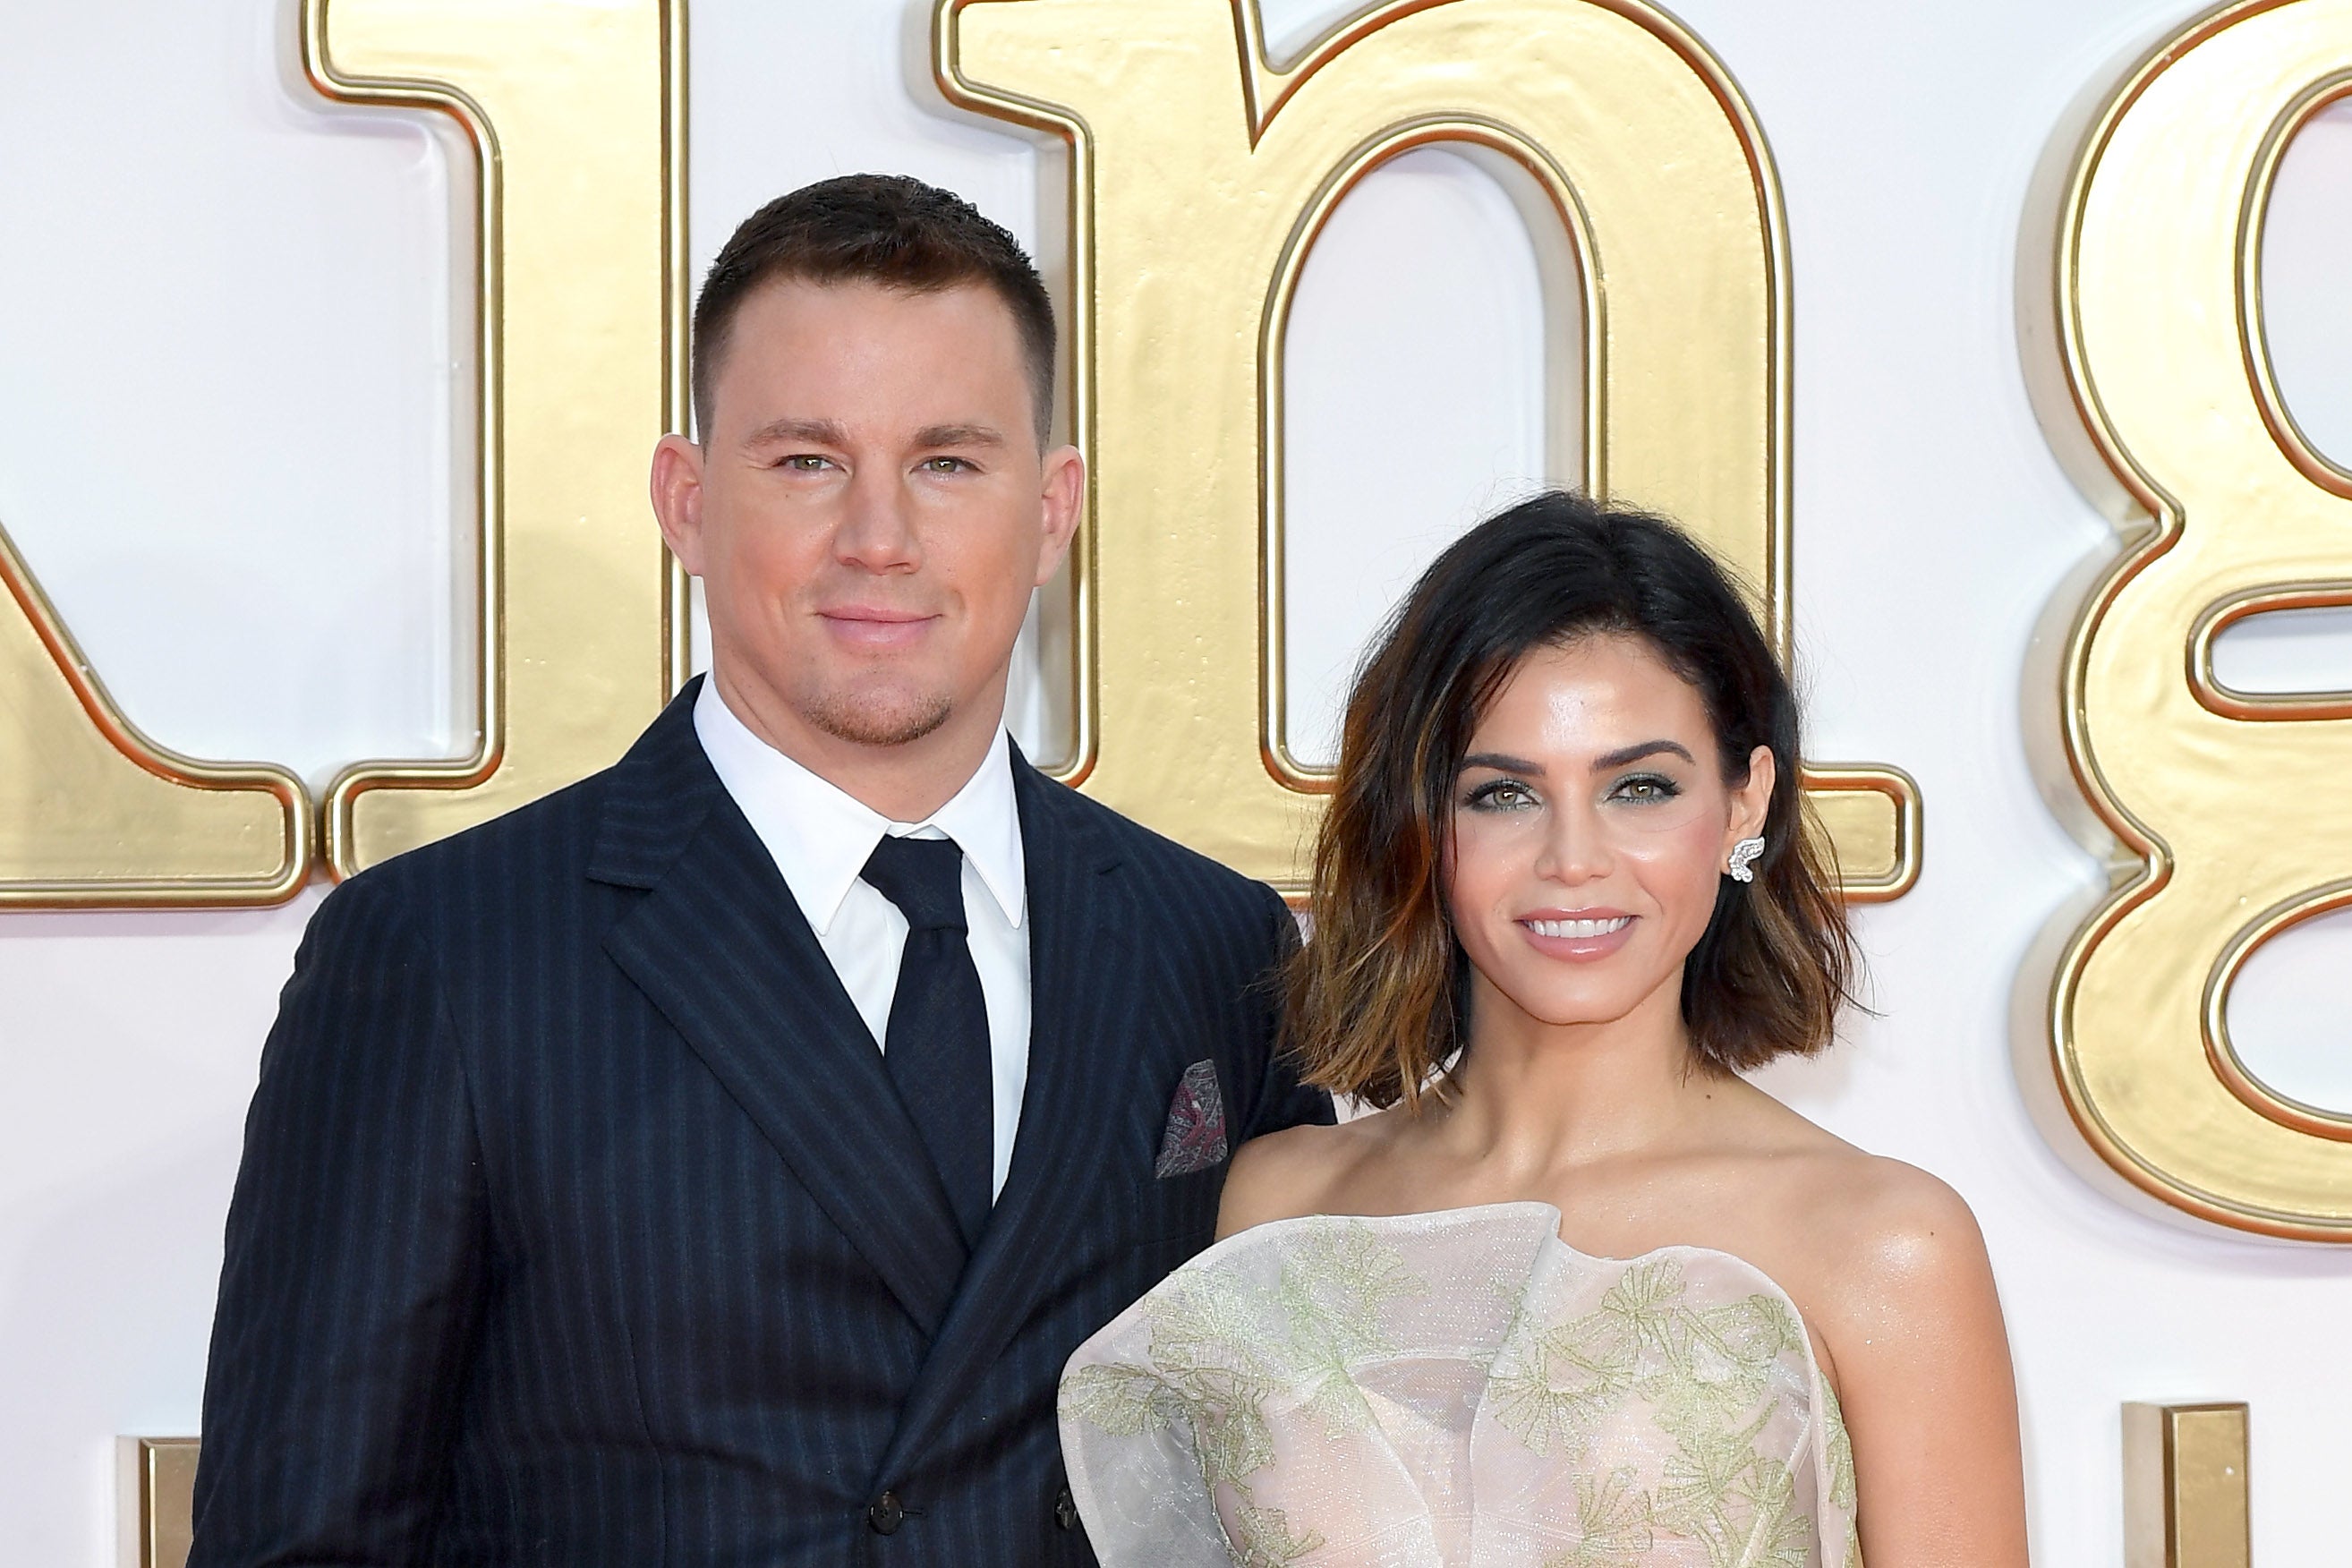 Here's What Is Reportedly Going On With Channing Tatum's Legal Battle With Jenna Dewan